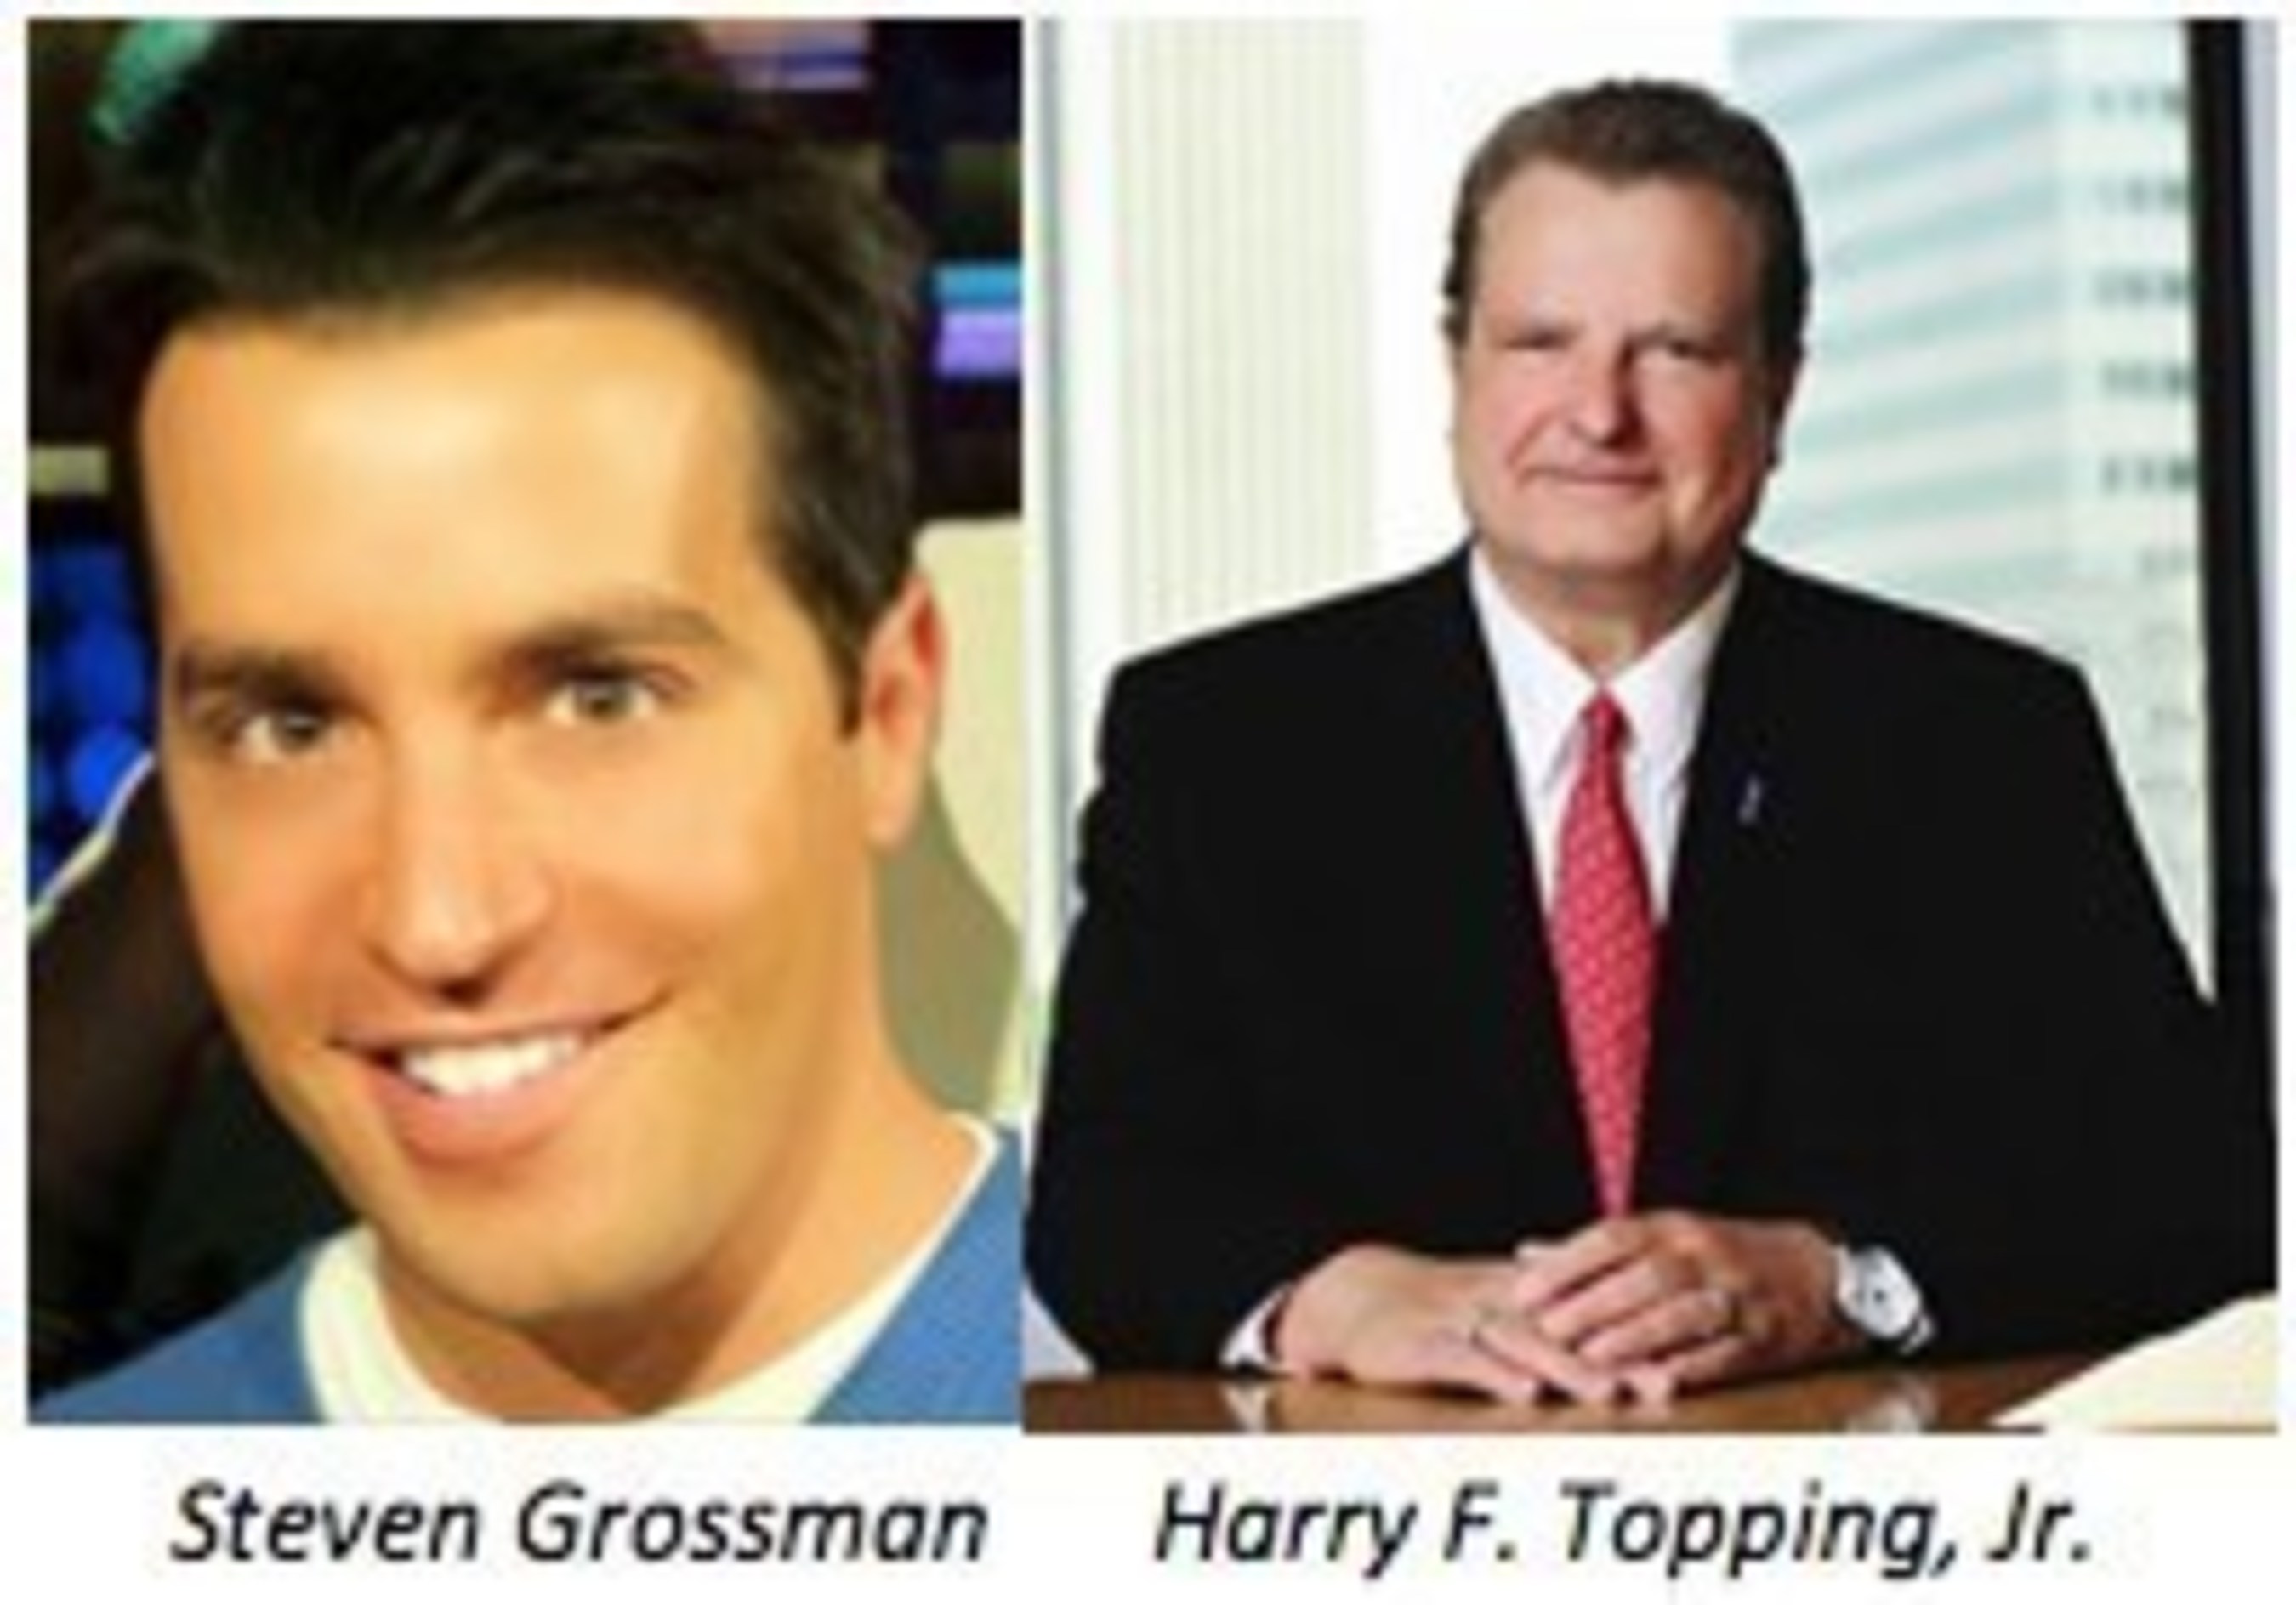 Talent manager Steven Grossman and City National Bank's SVP Harry F. Topping, Jr. will be honored at September 29th fundraiser at Warner Bros. Studios